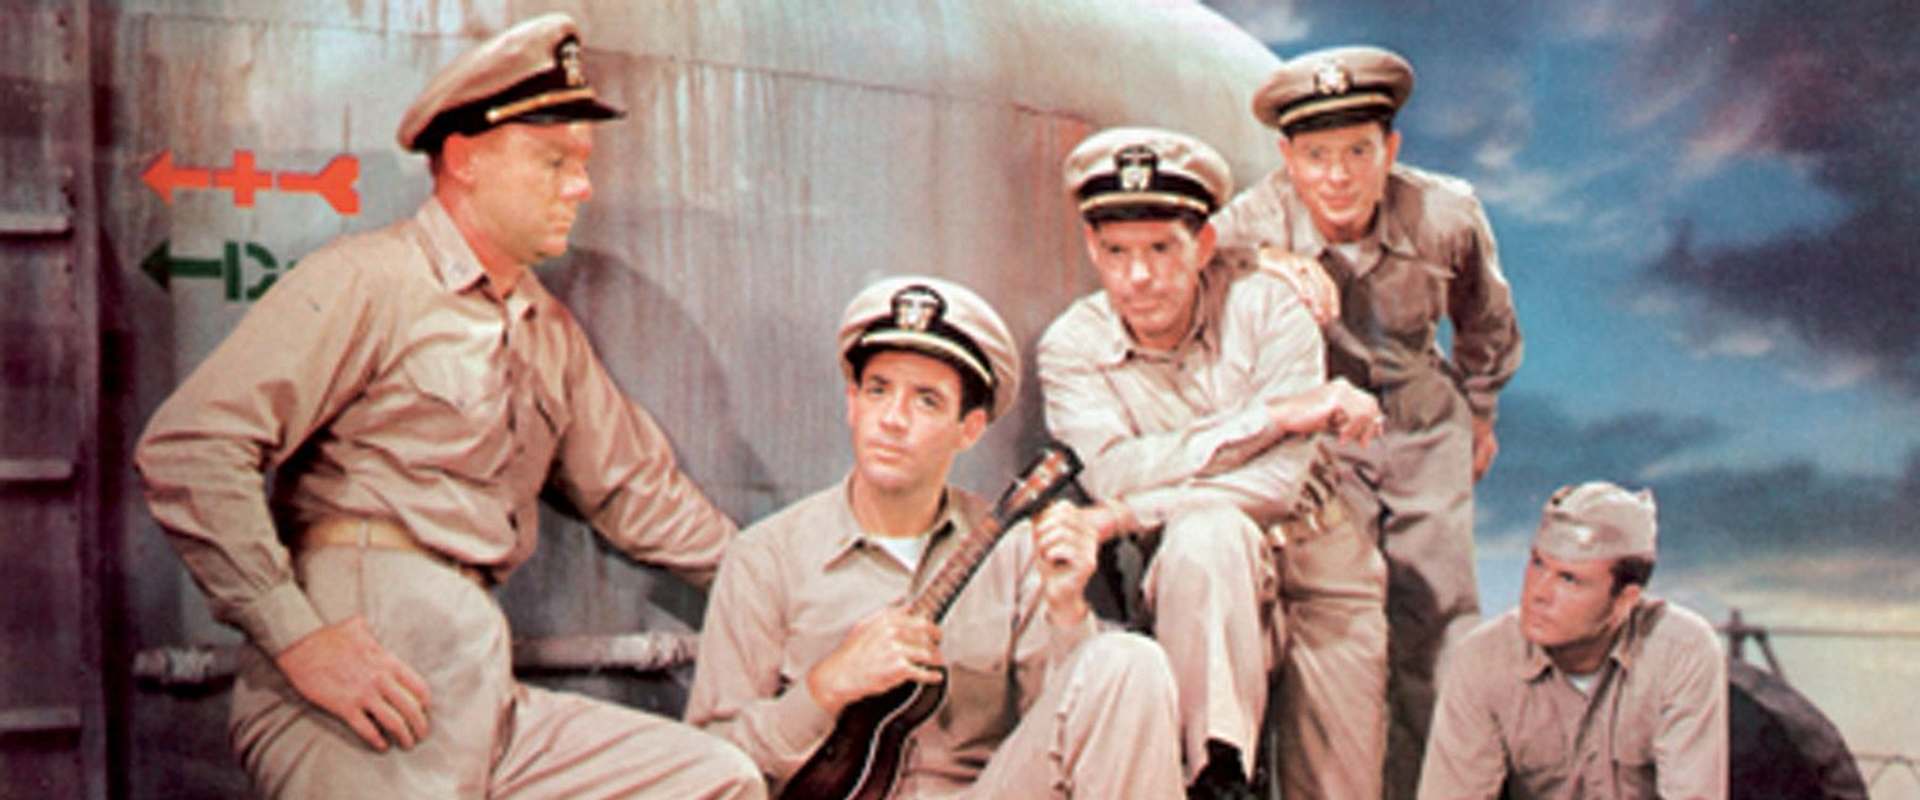 The Caine Mutiny background 2